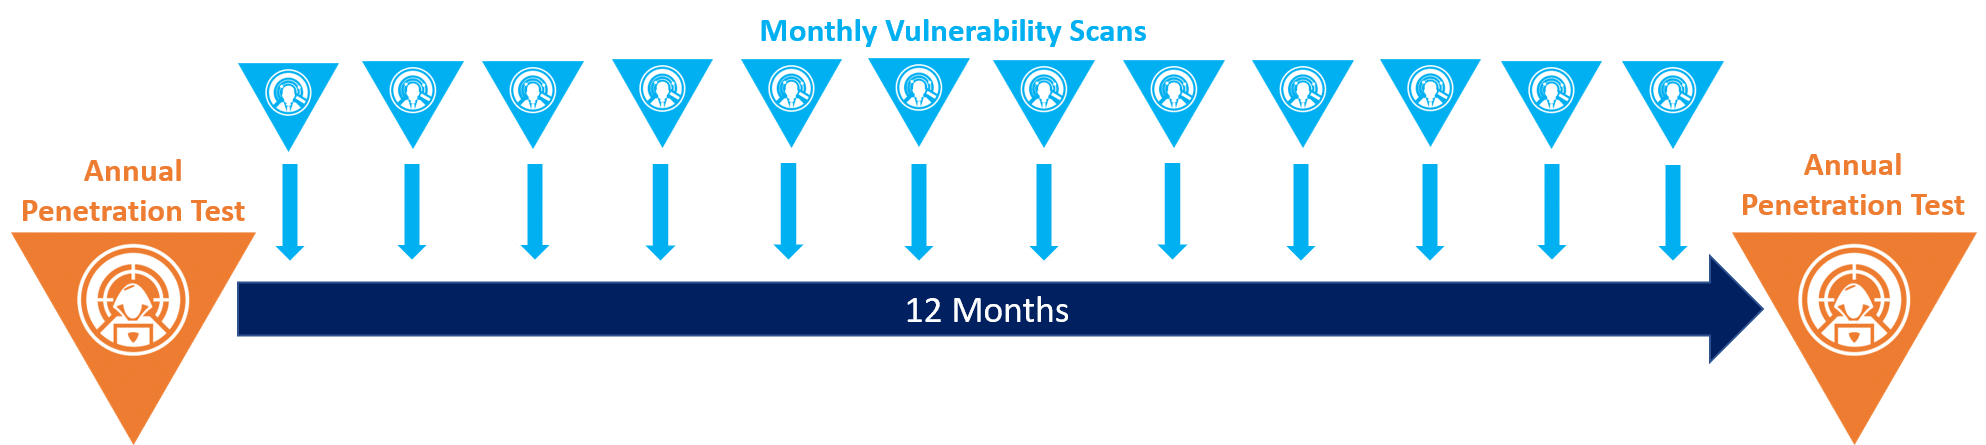 A diagram showing how monthly vulnerability scans are performed between annual penetration tests by Rootshell Security.